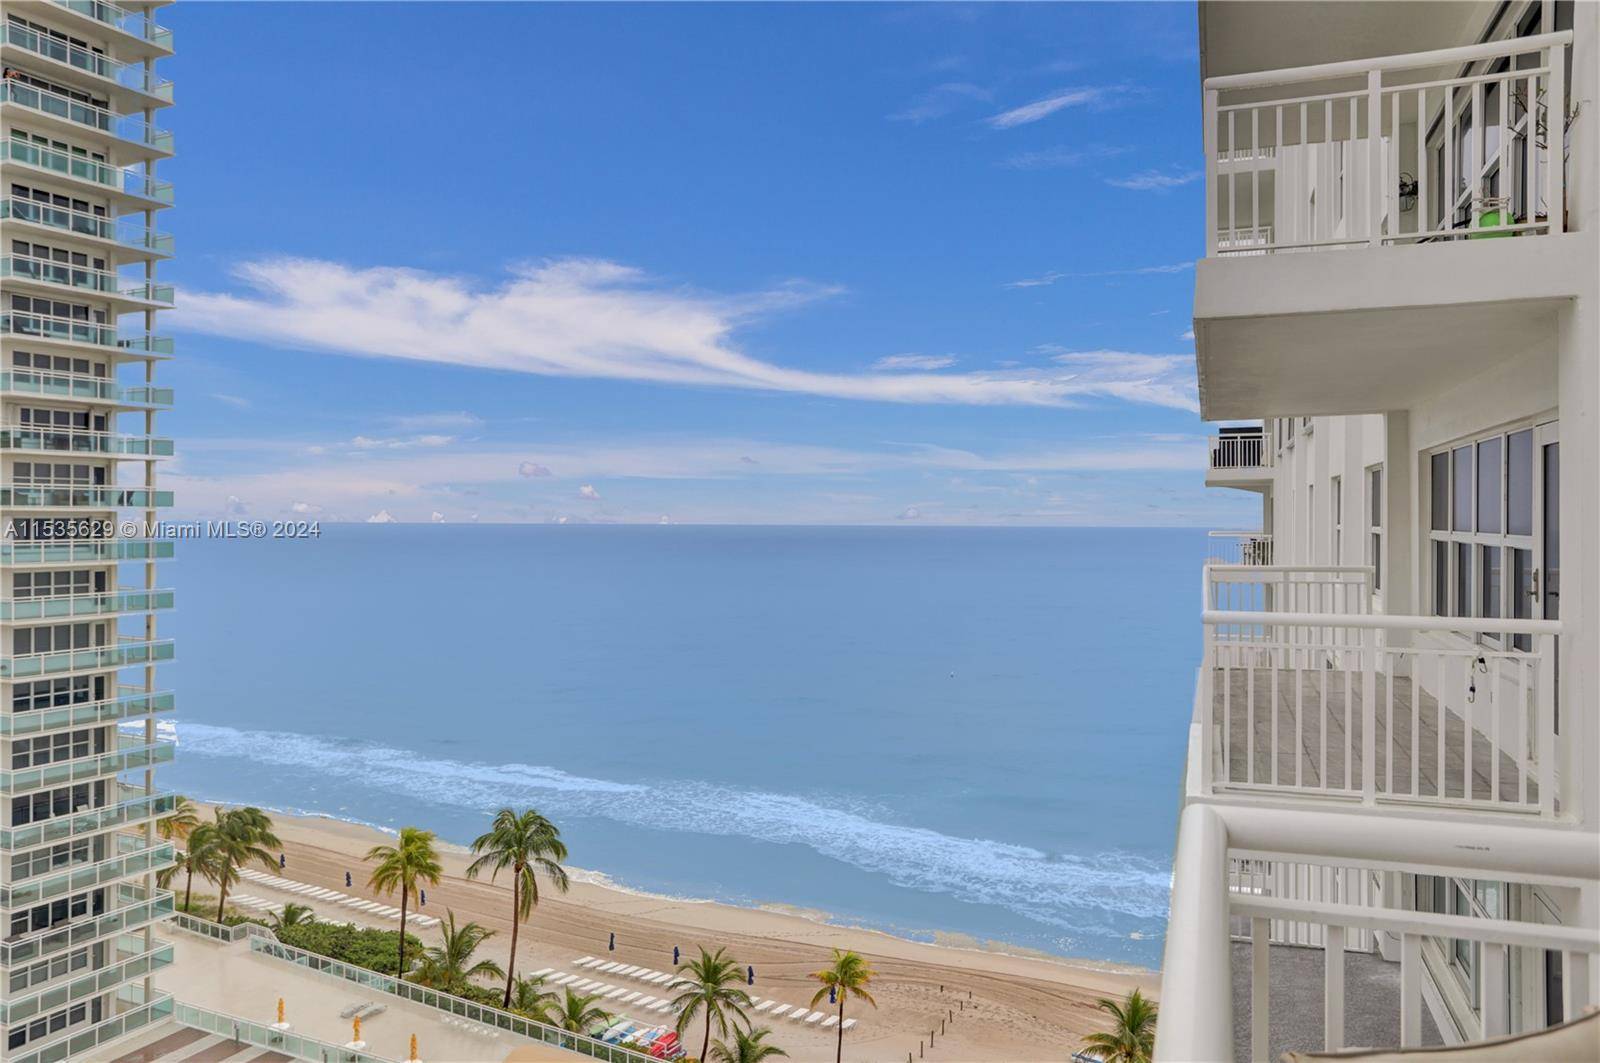 Embrace coastal living in this one bedroom unit nestled within an oceanfront building.